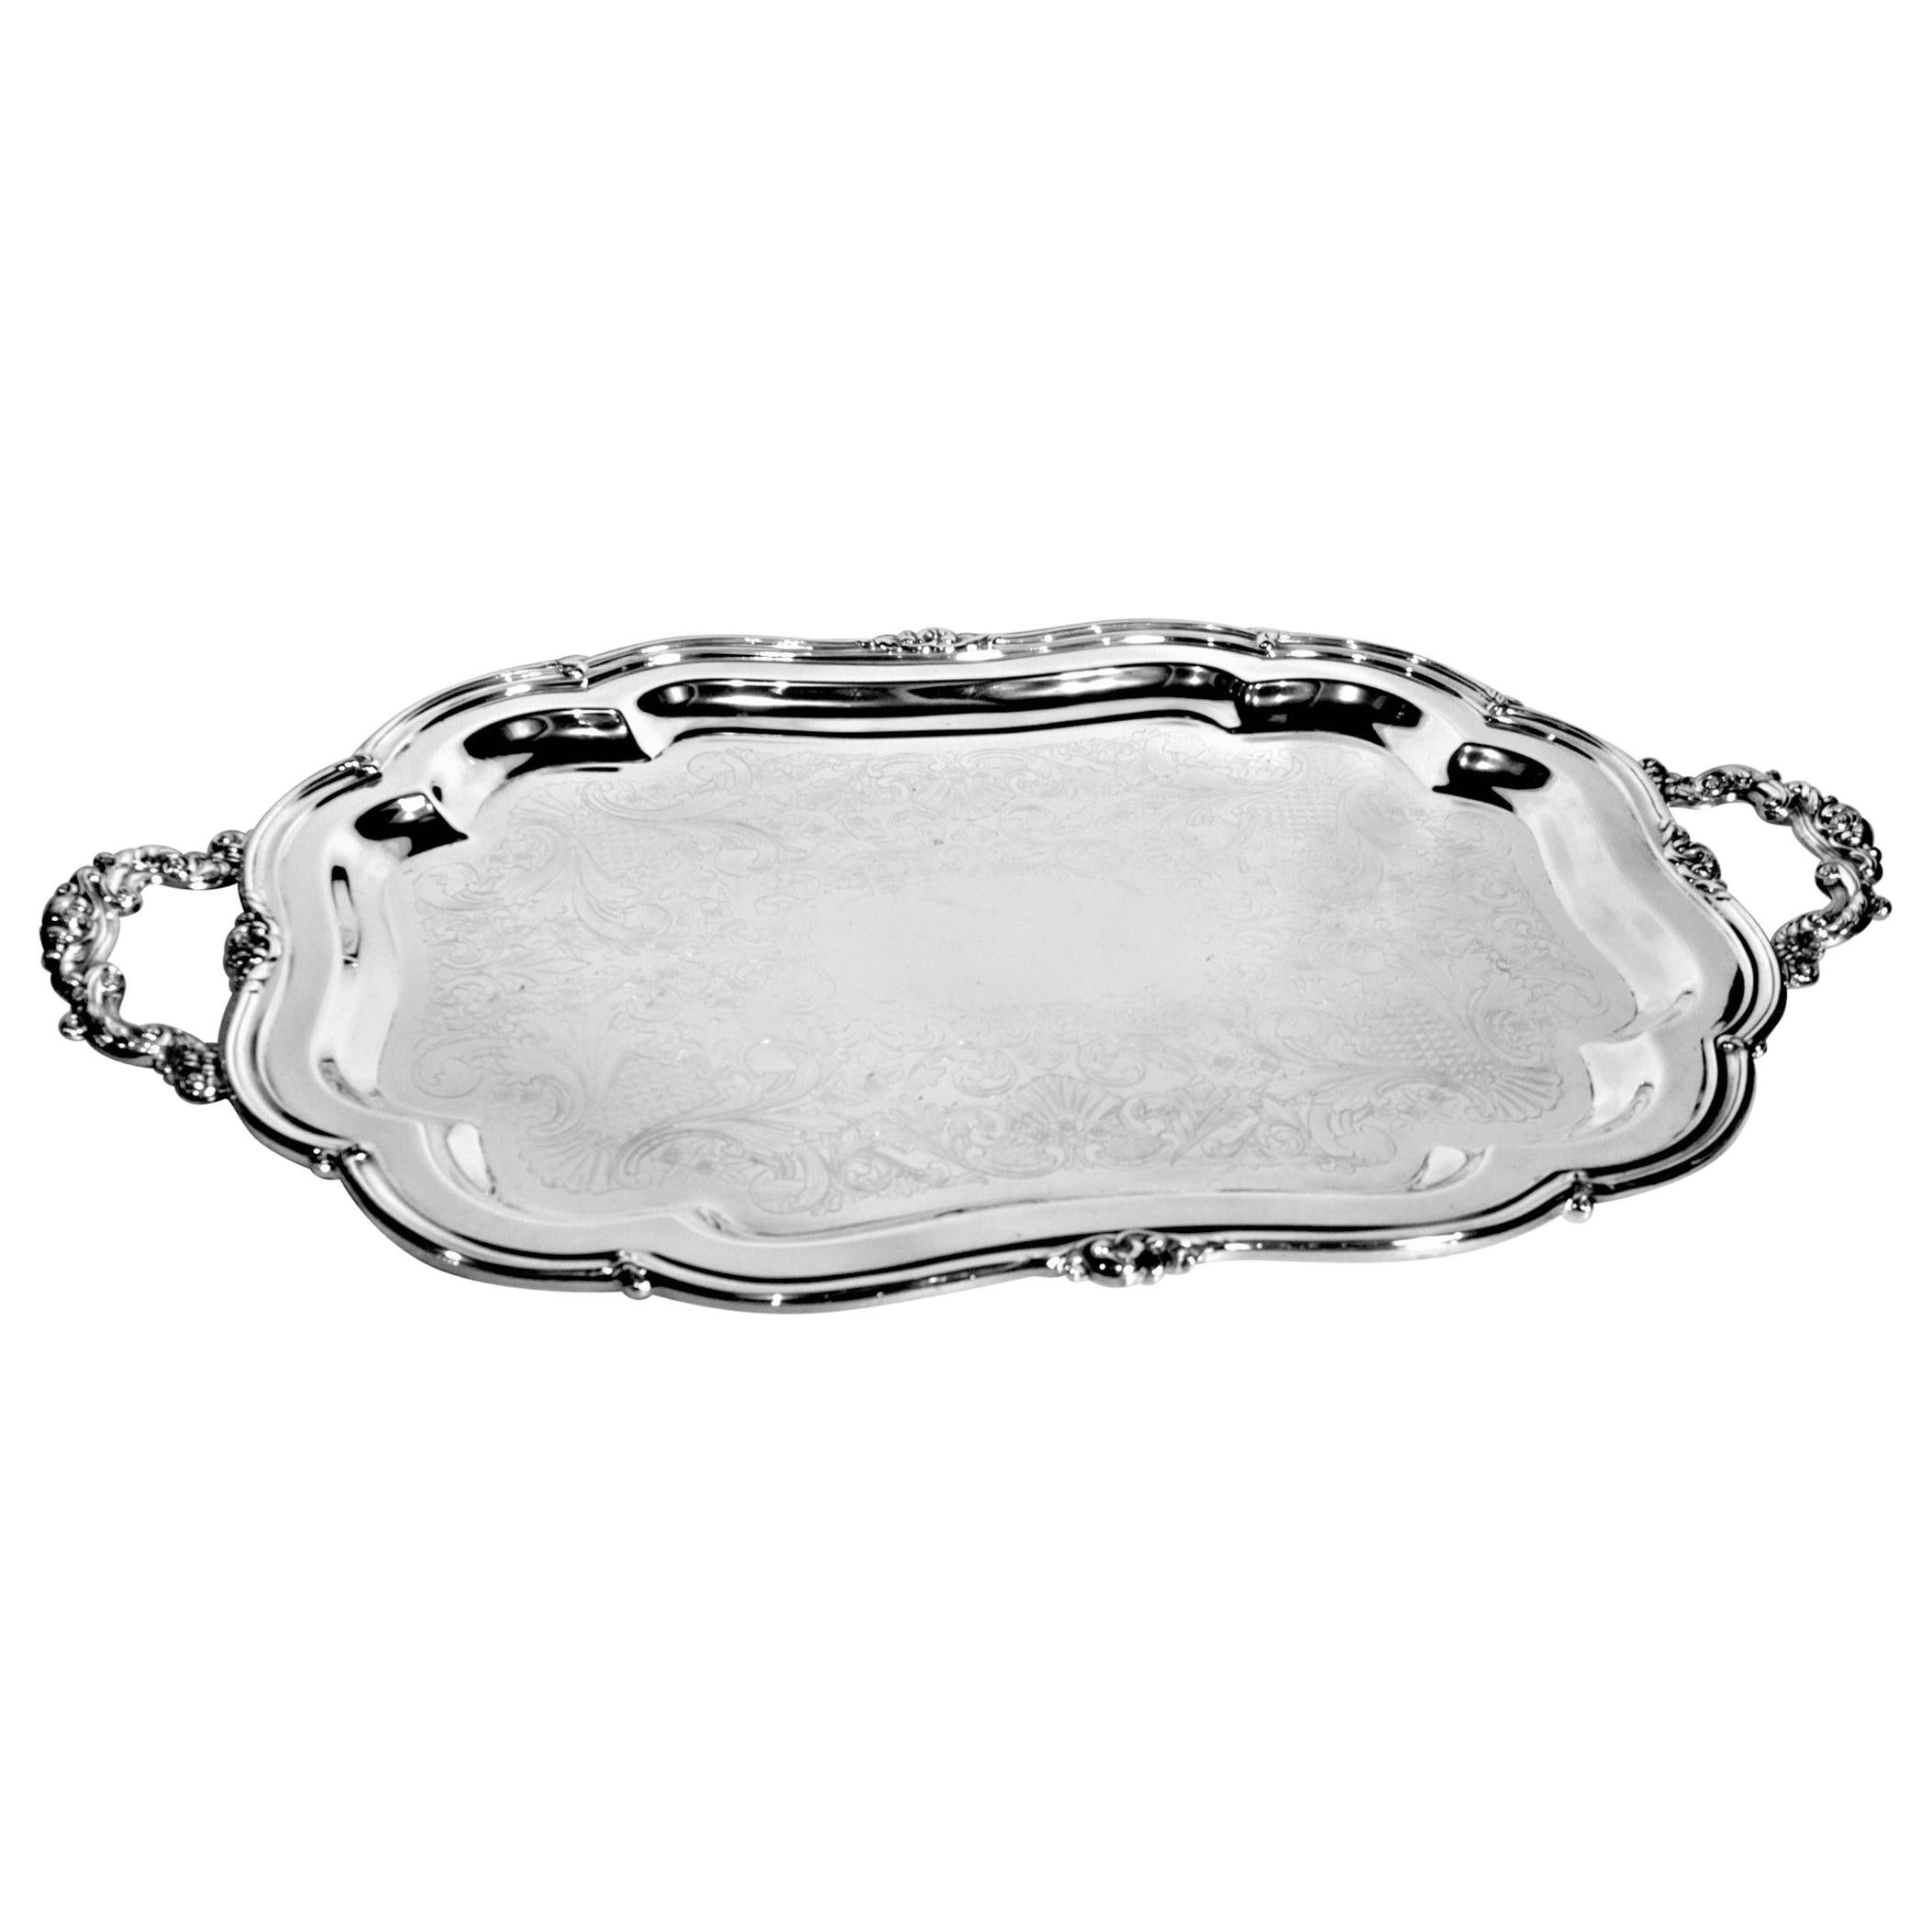 Large Antique Styled Silver Plated Serving Tray with Ornate Engraving & Handles